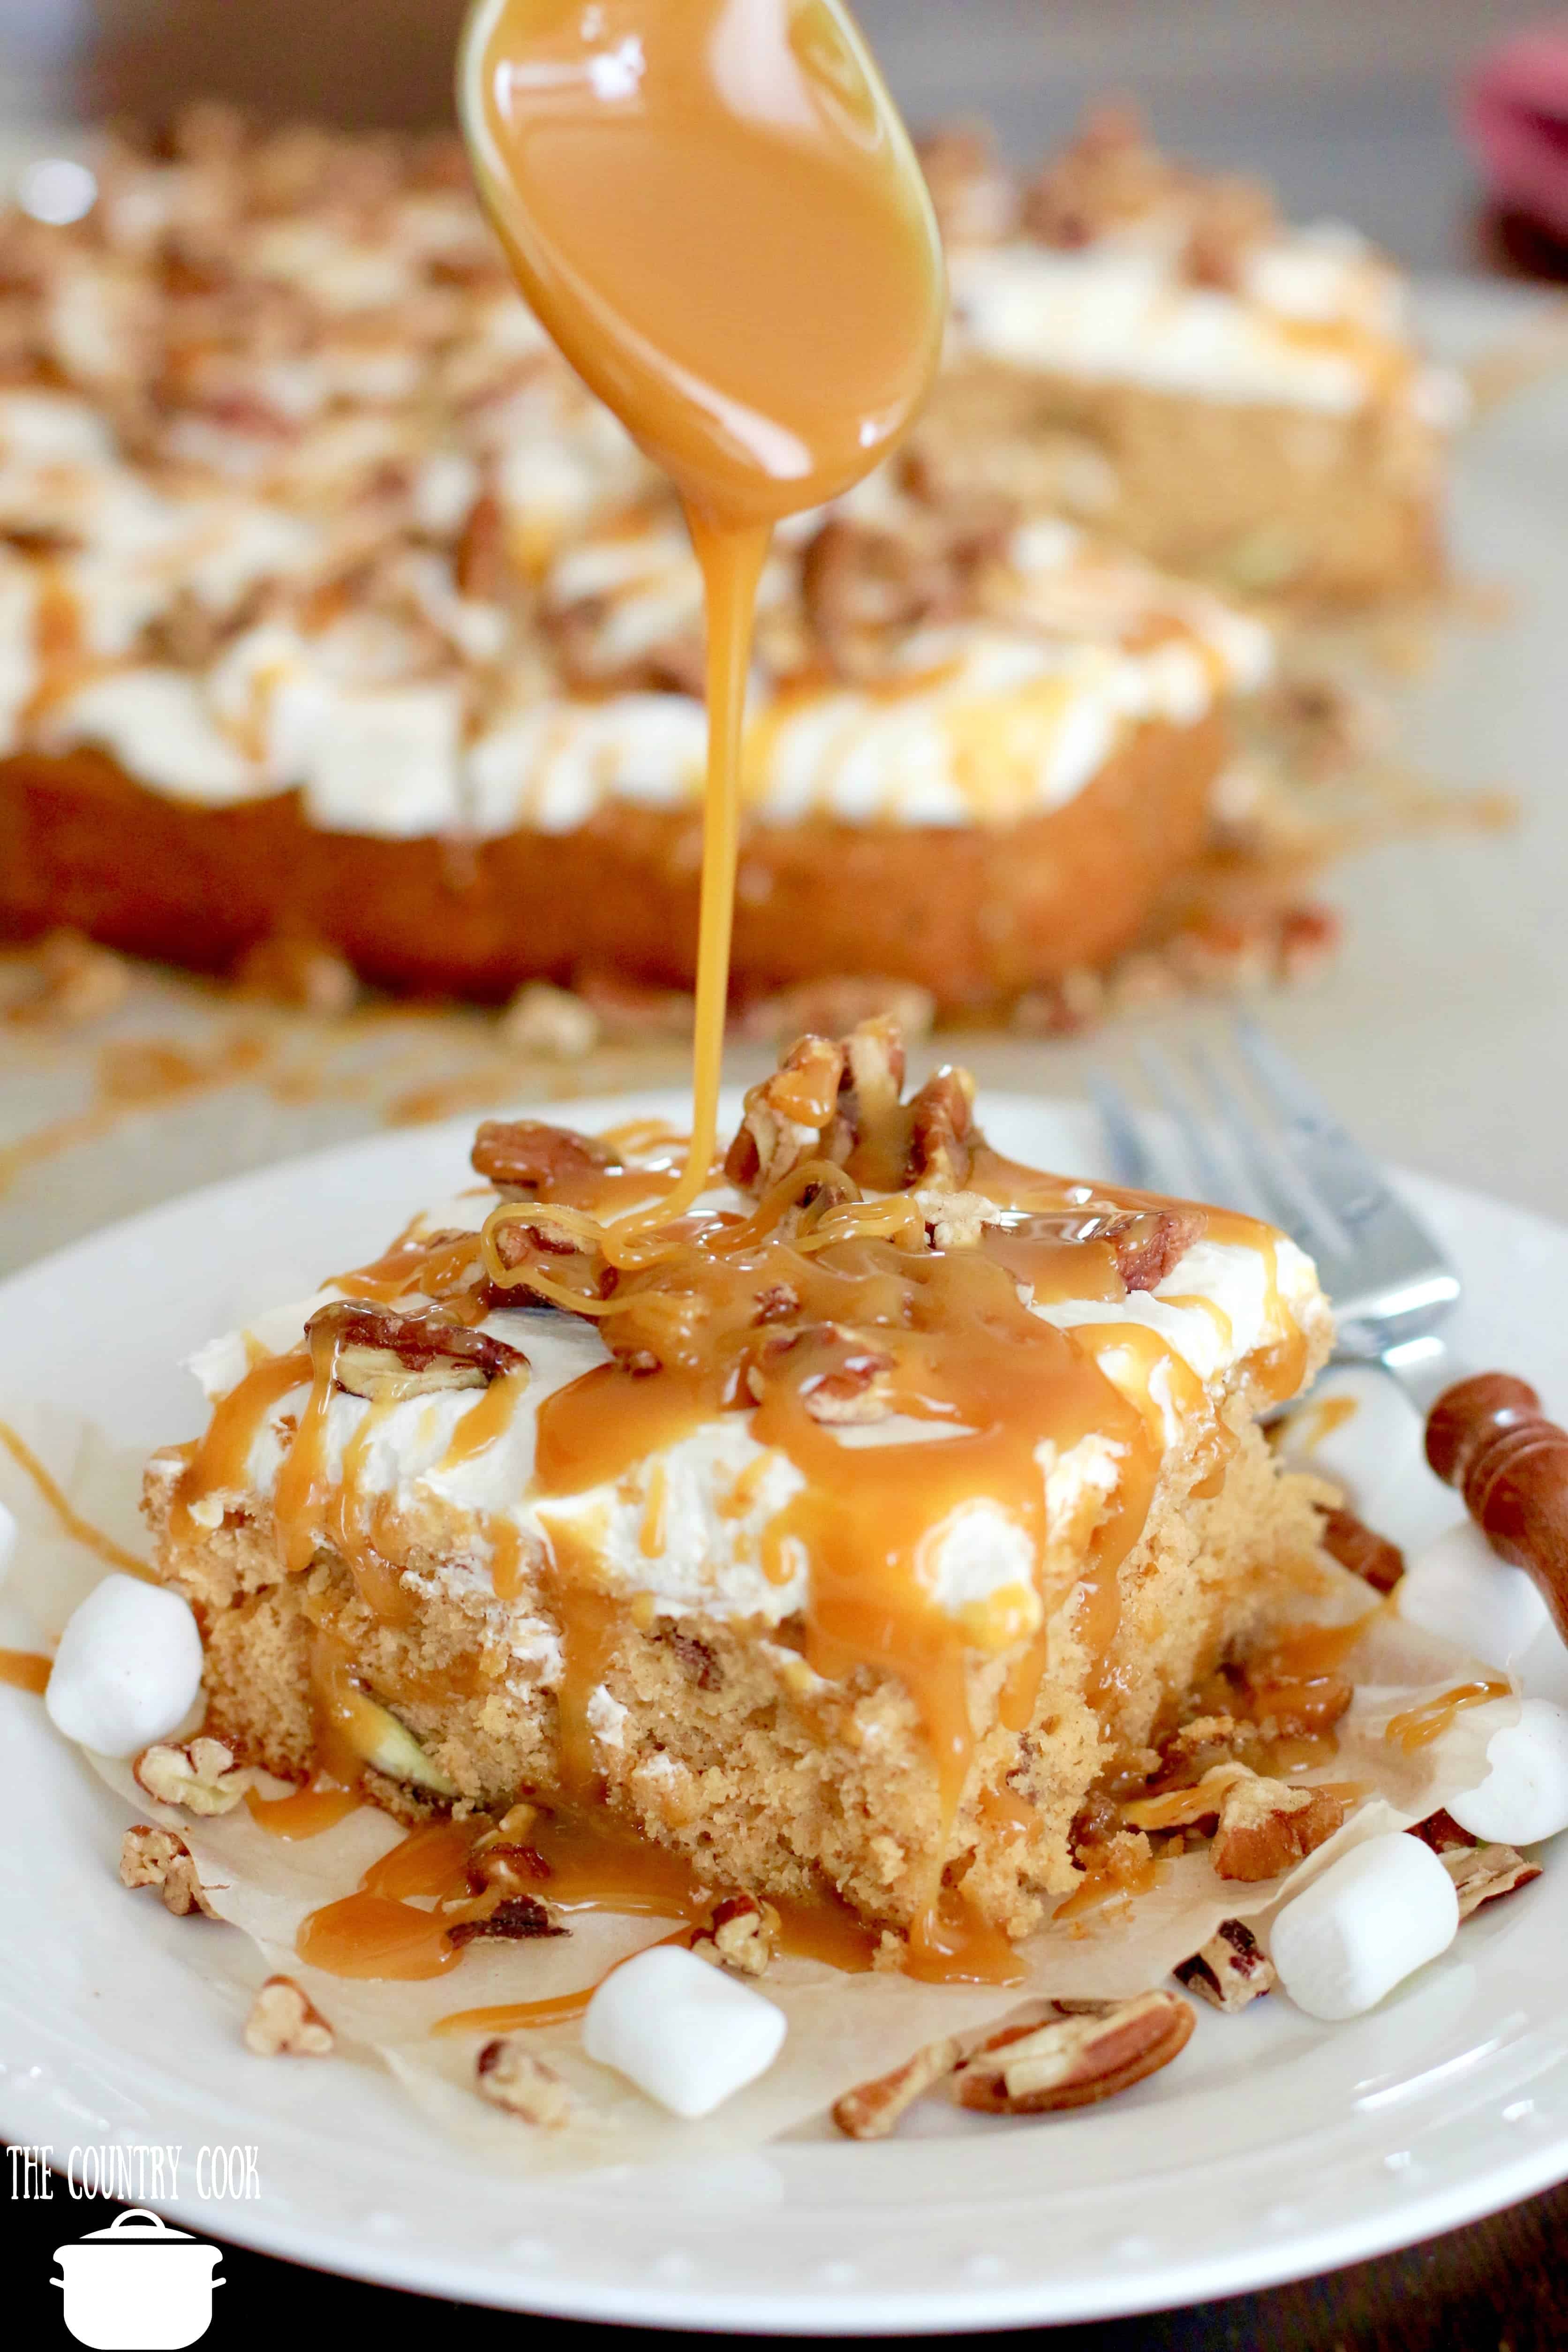 Muffin Mix Cake with chopped pecans and salted caramel. Spoon shown drizzling caramel on top of cake.